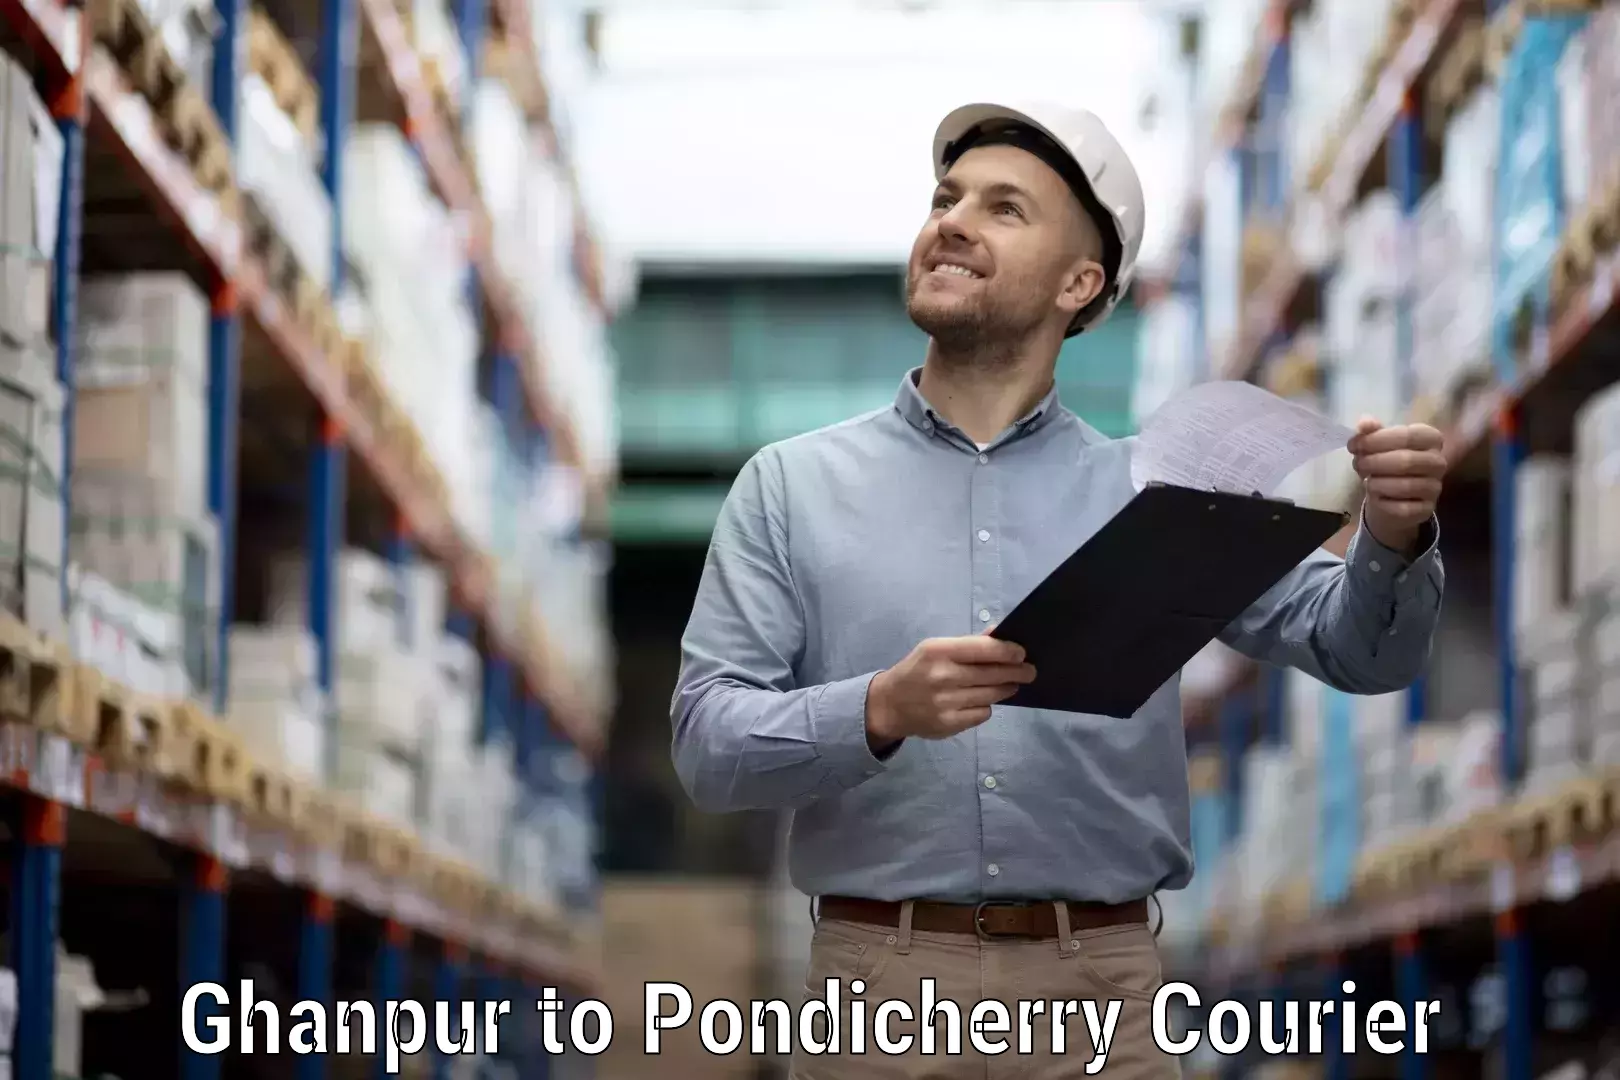 Nationwide delivery network Ghanpur to Pondicherry